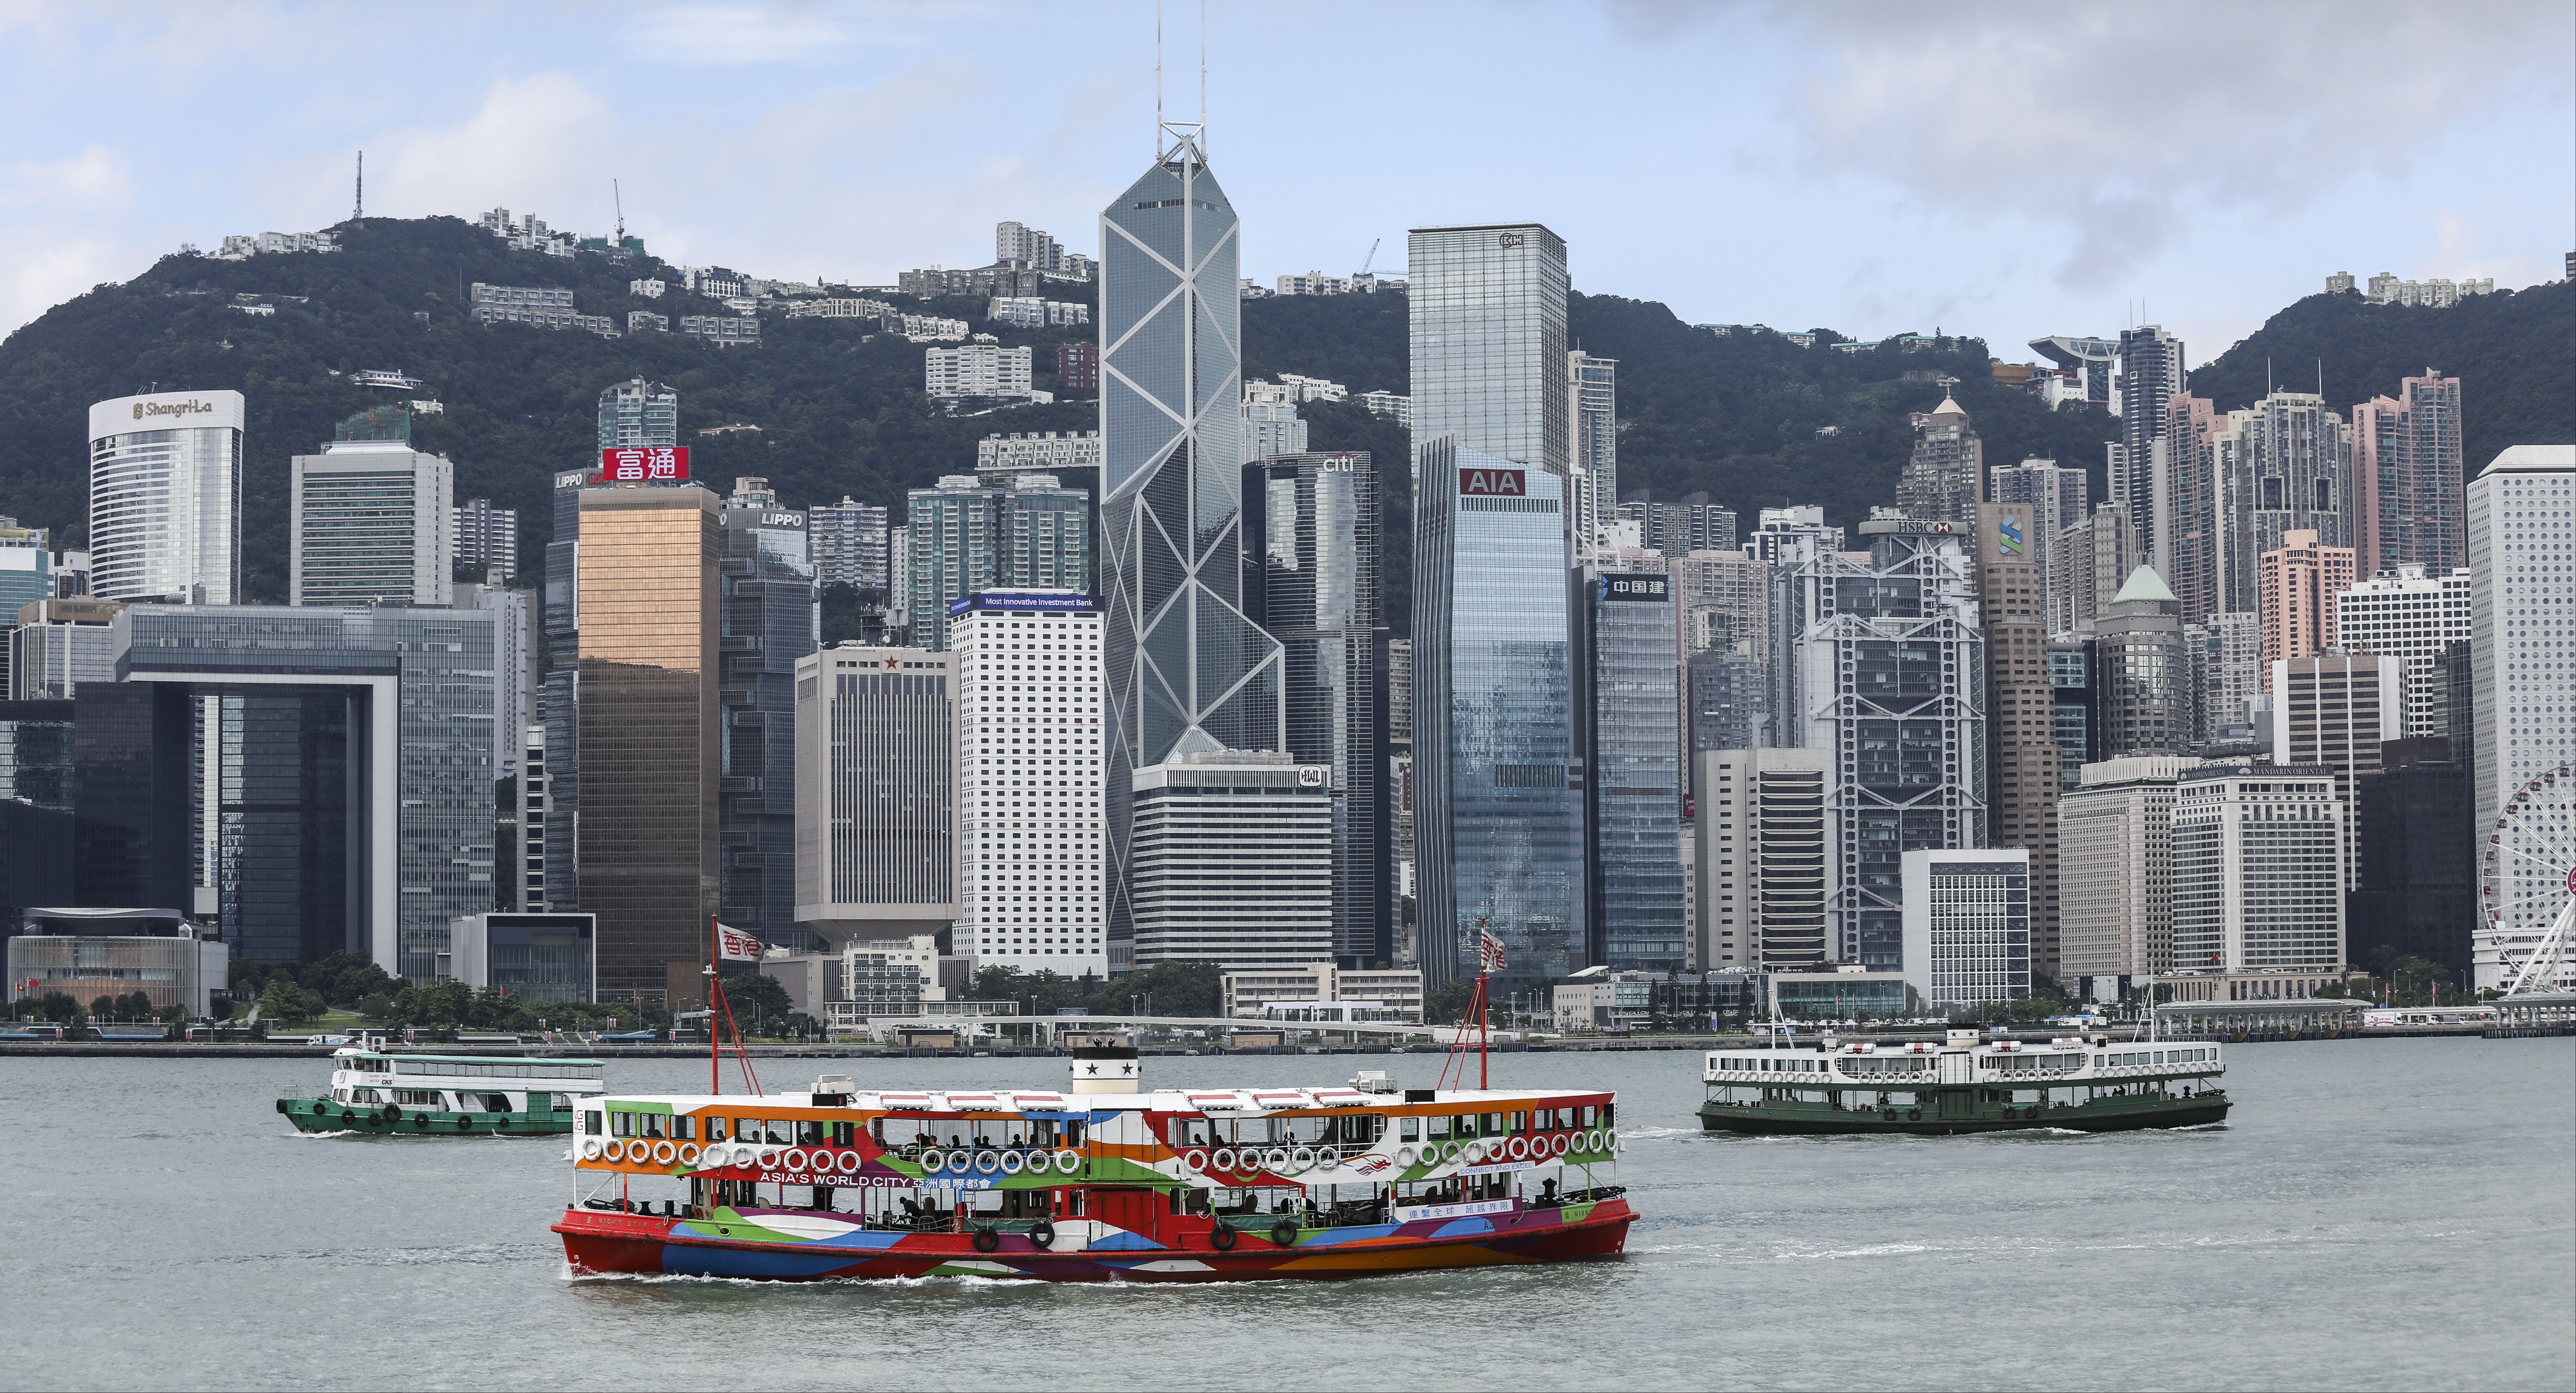 Hong Kong’s iconic Star Ferry vessels sail across Victoria Harbour in front of the financial district in Central. China’s government plans to transform Hong Kong and 10 cities around the Pearl River Delta into a thriving global centre of technology, innovation and economic vibrancy. Photo: Dickson Lee